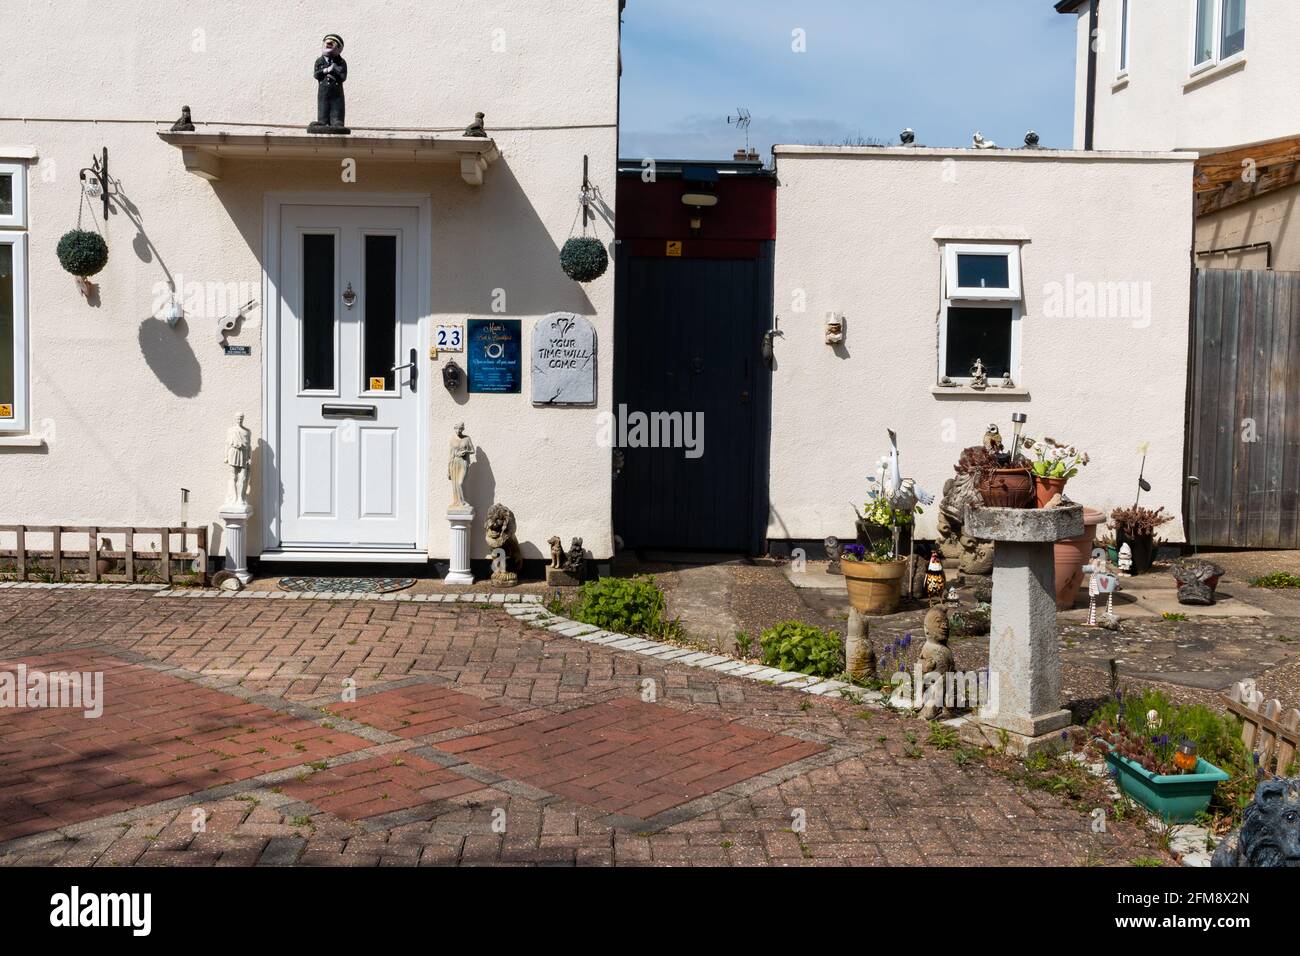 A house with a lot of garden ornaments and wall plaques.  Cambridge, UK Stock Photo